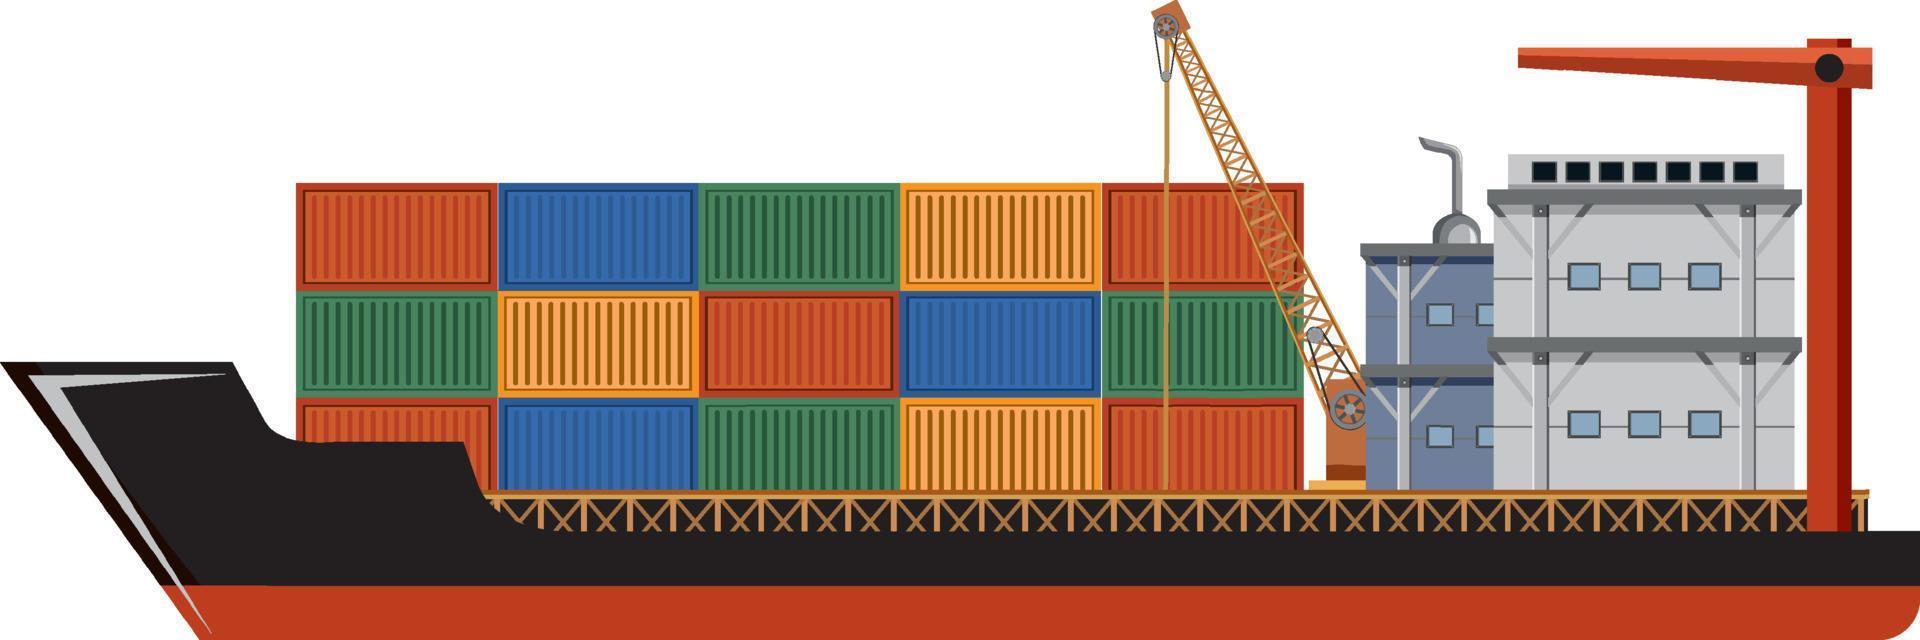 Cargo ship with containers vector